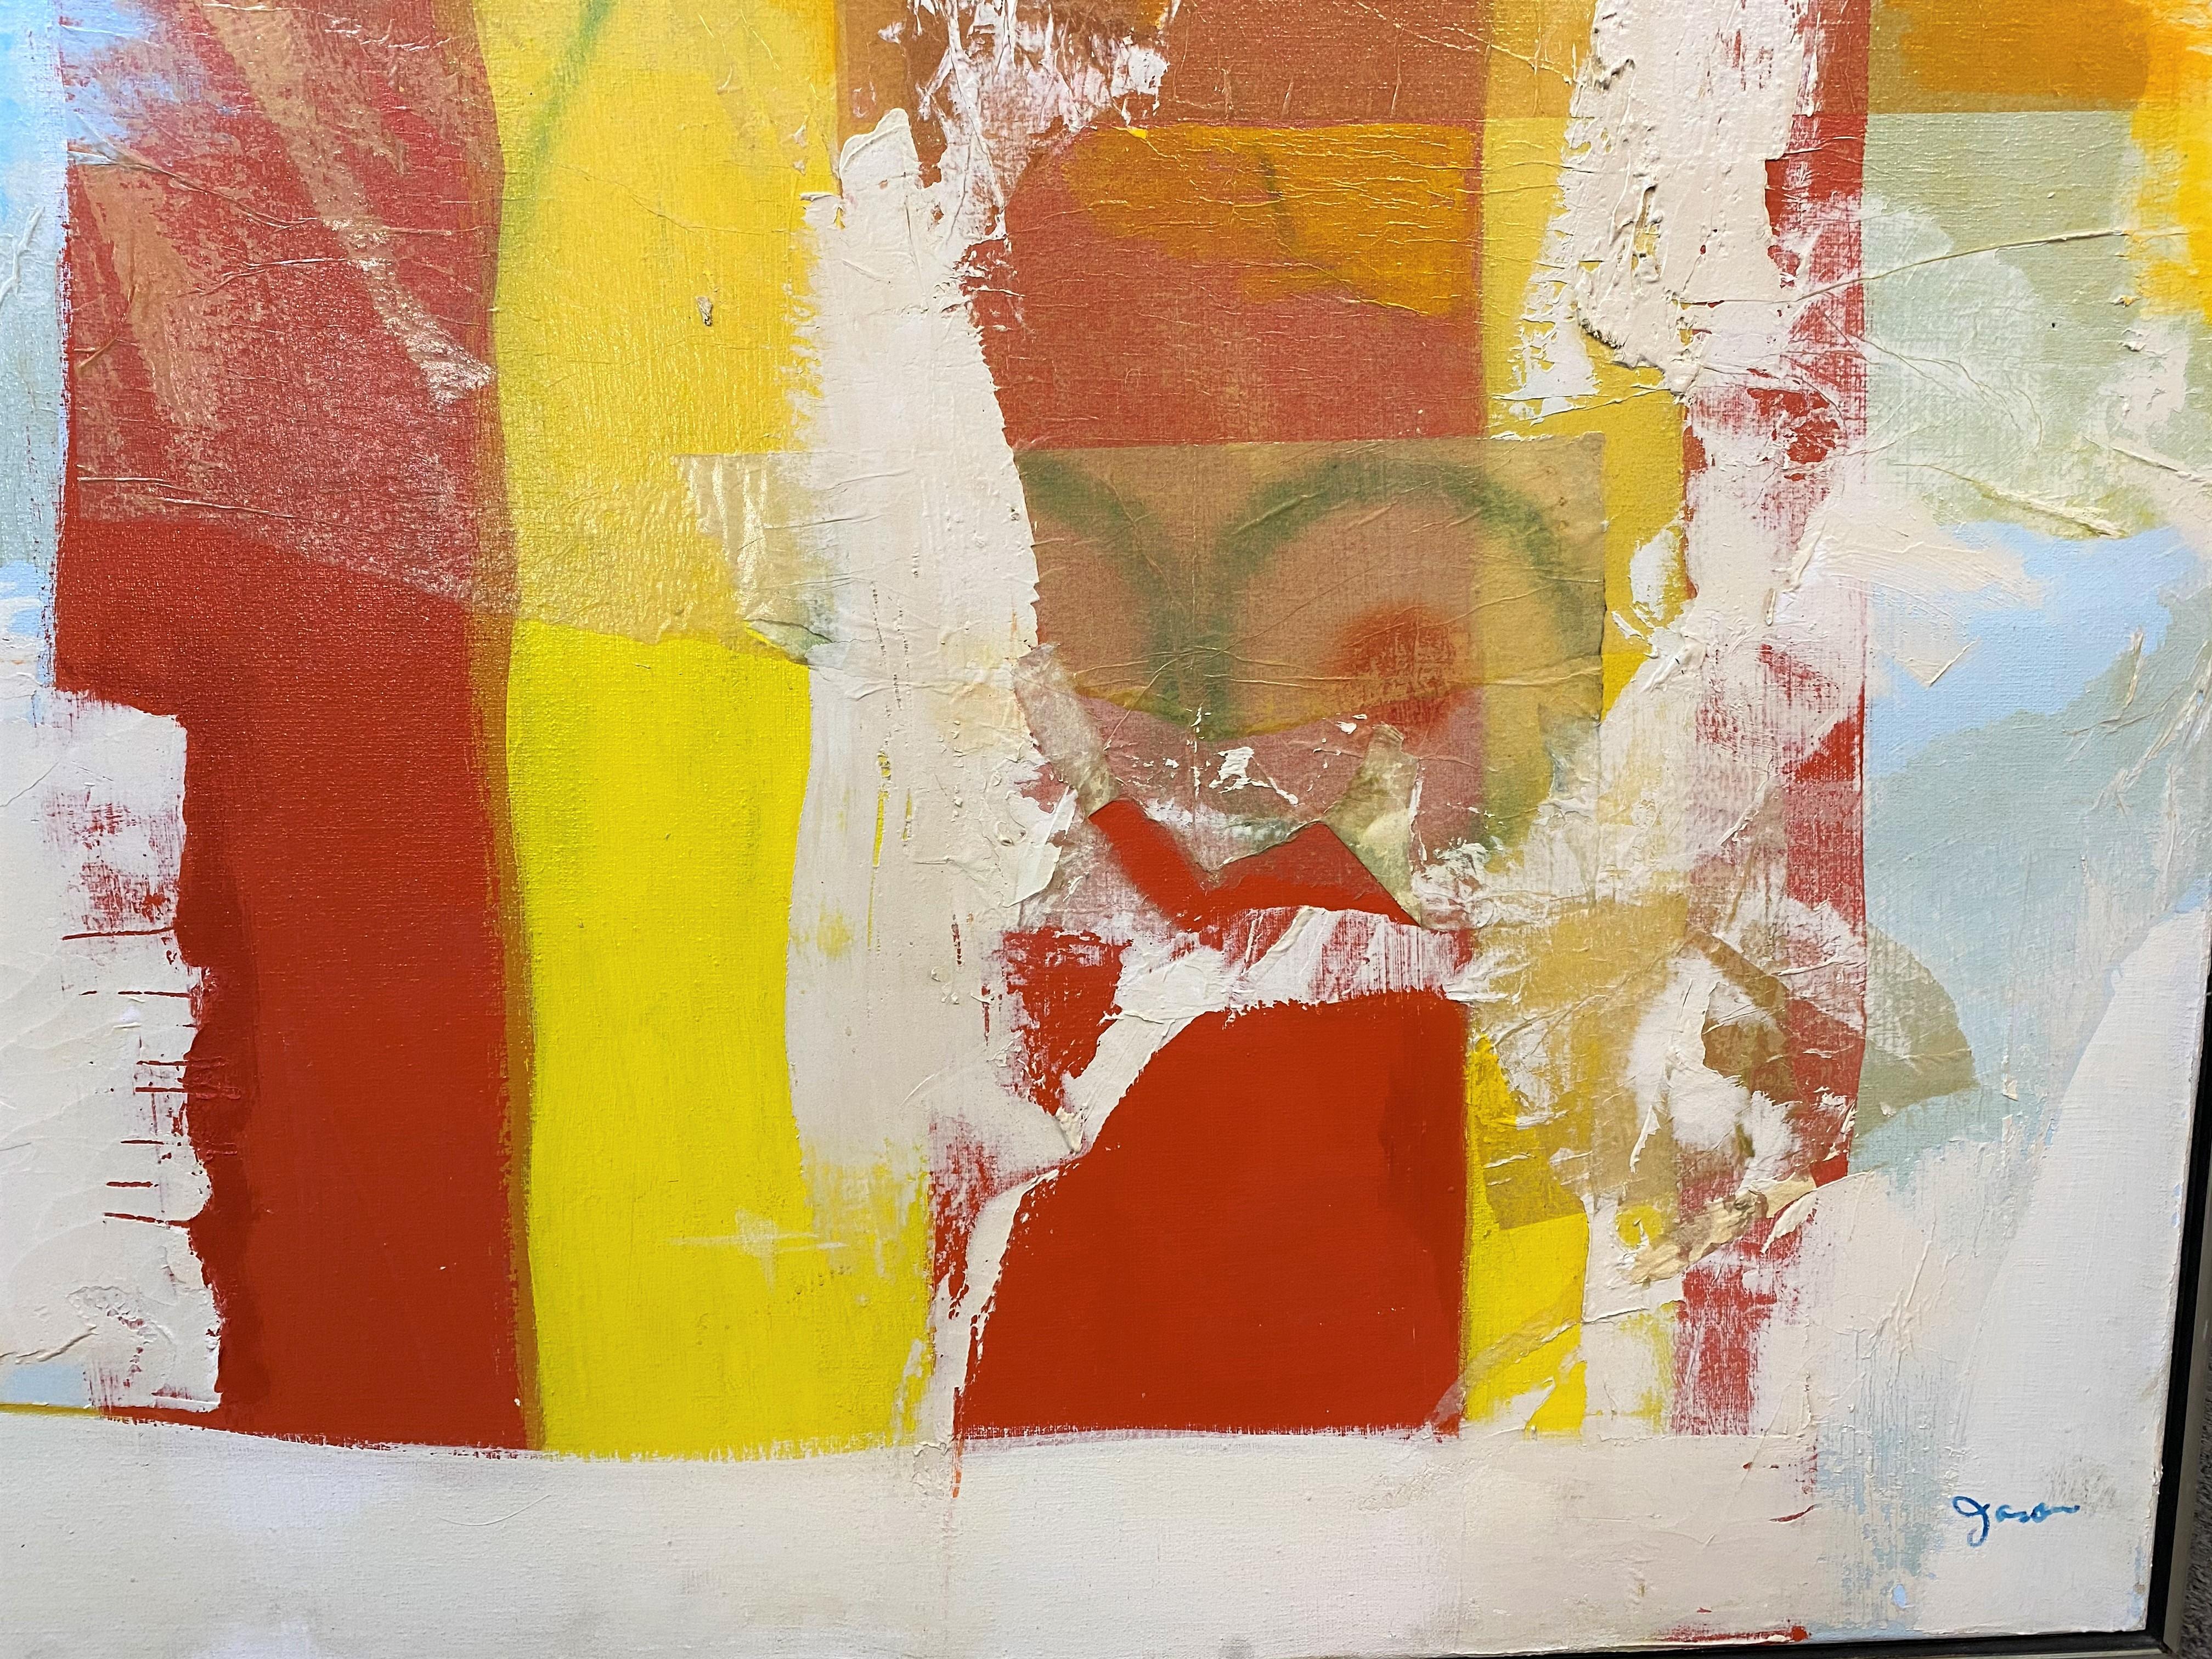 A fine mixed media abstract in yellows, reds, blues, and whites, acquired from a New York gallery. Oil and crepe or tissue paper on canvas, signed lower right “Jason,” and housed in a modern wooden frame with chrome highlight. Probably dates to the